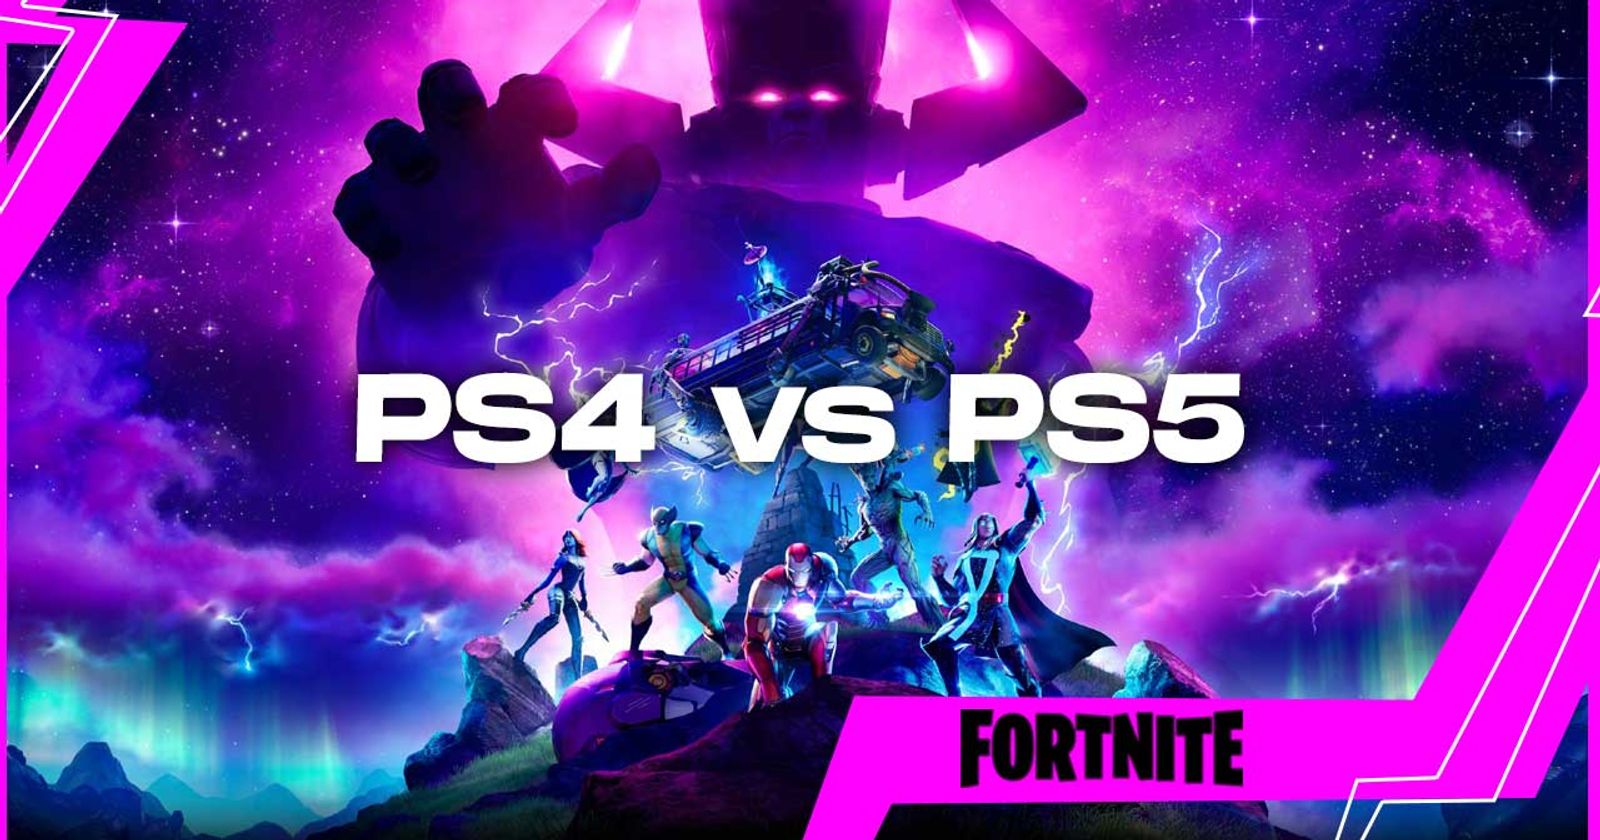 NEW* PS5 Fortnite GAMEPLAY! (NEXT-GEN Playstation 5) 